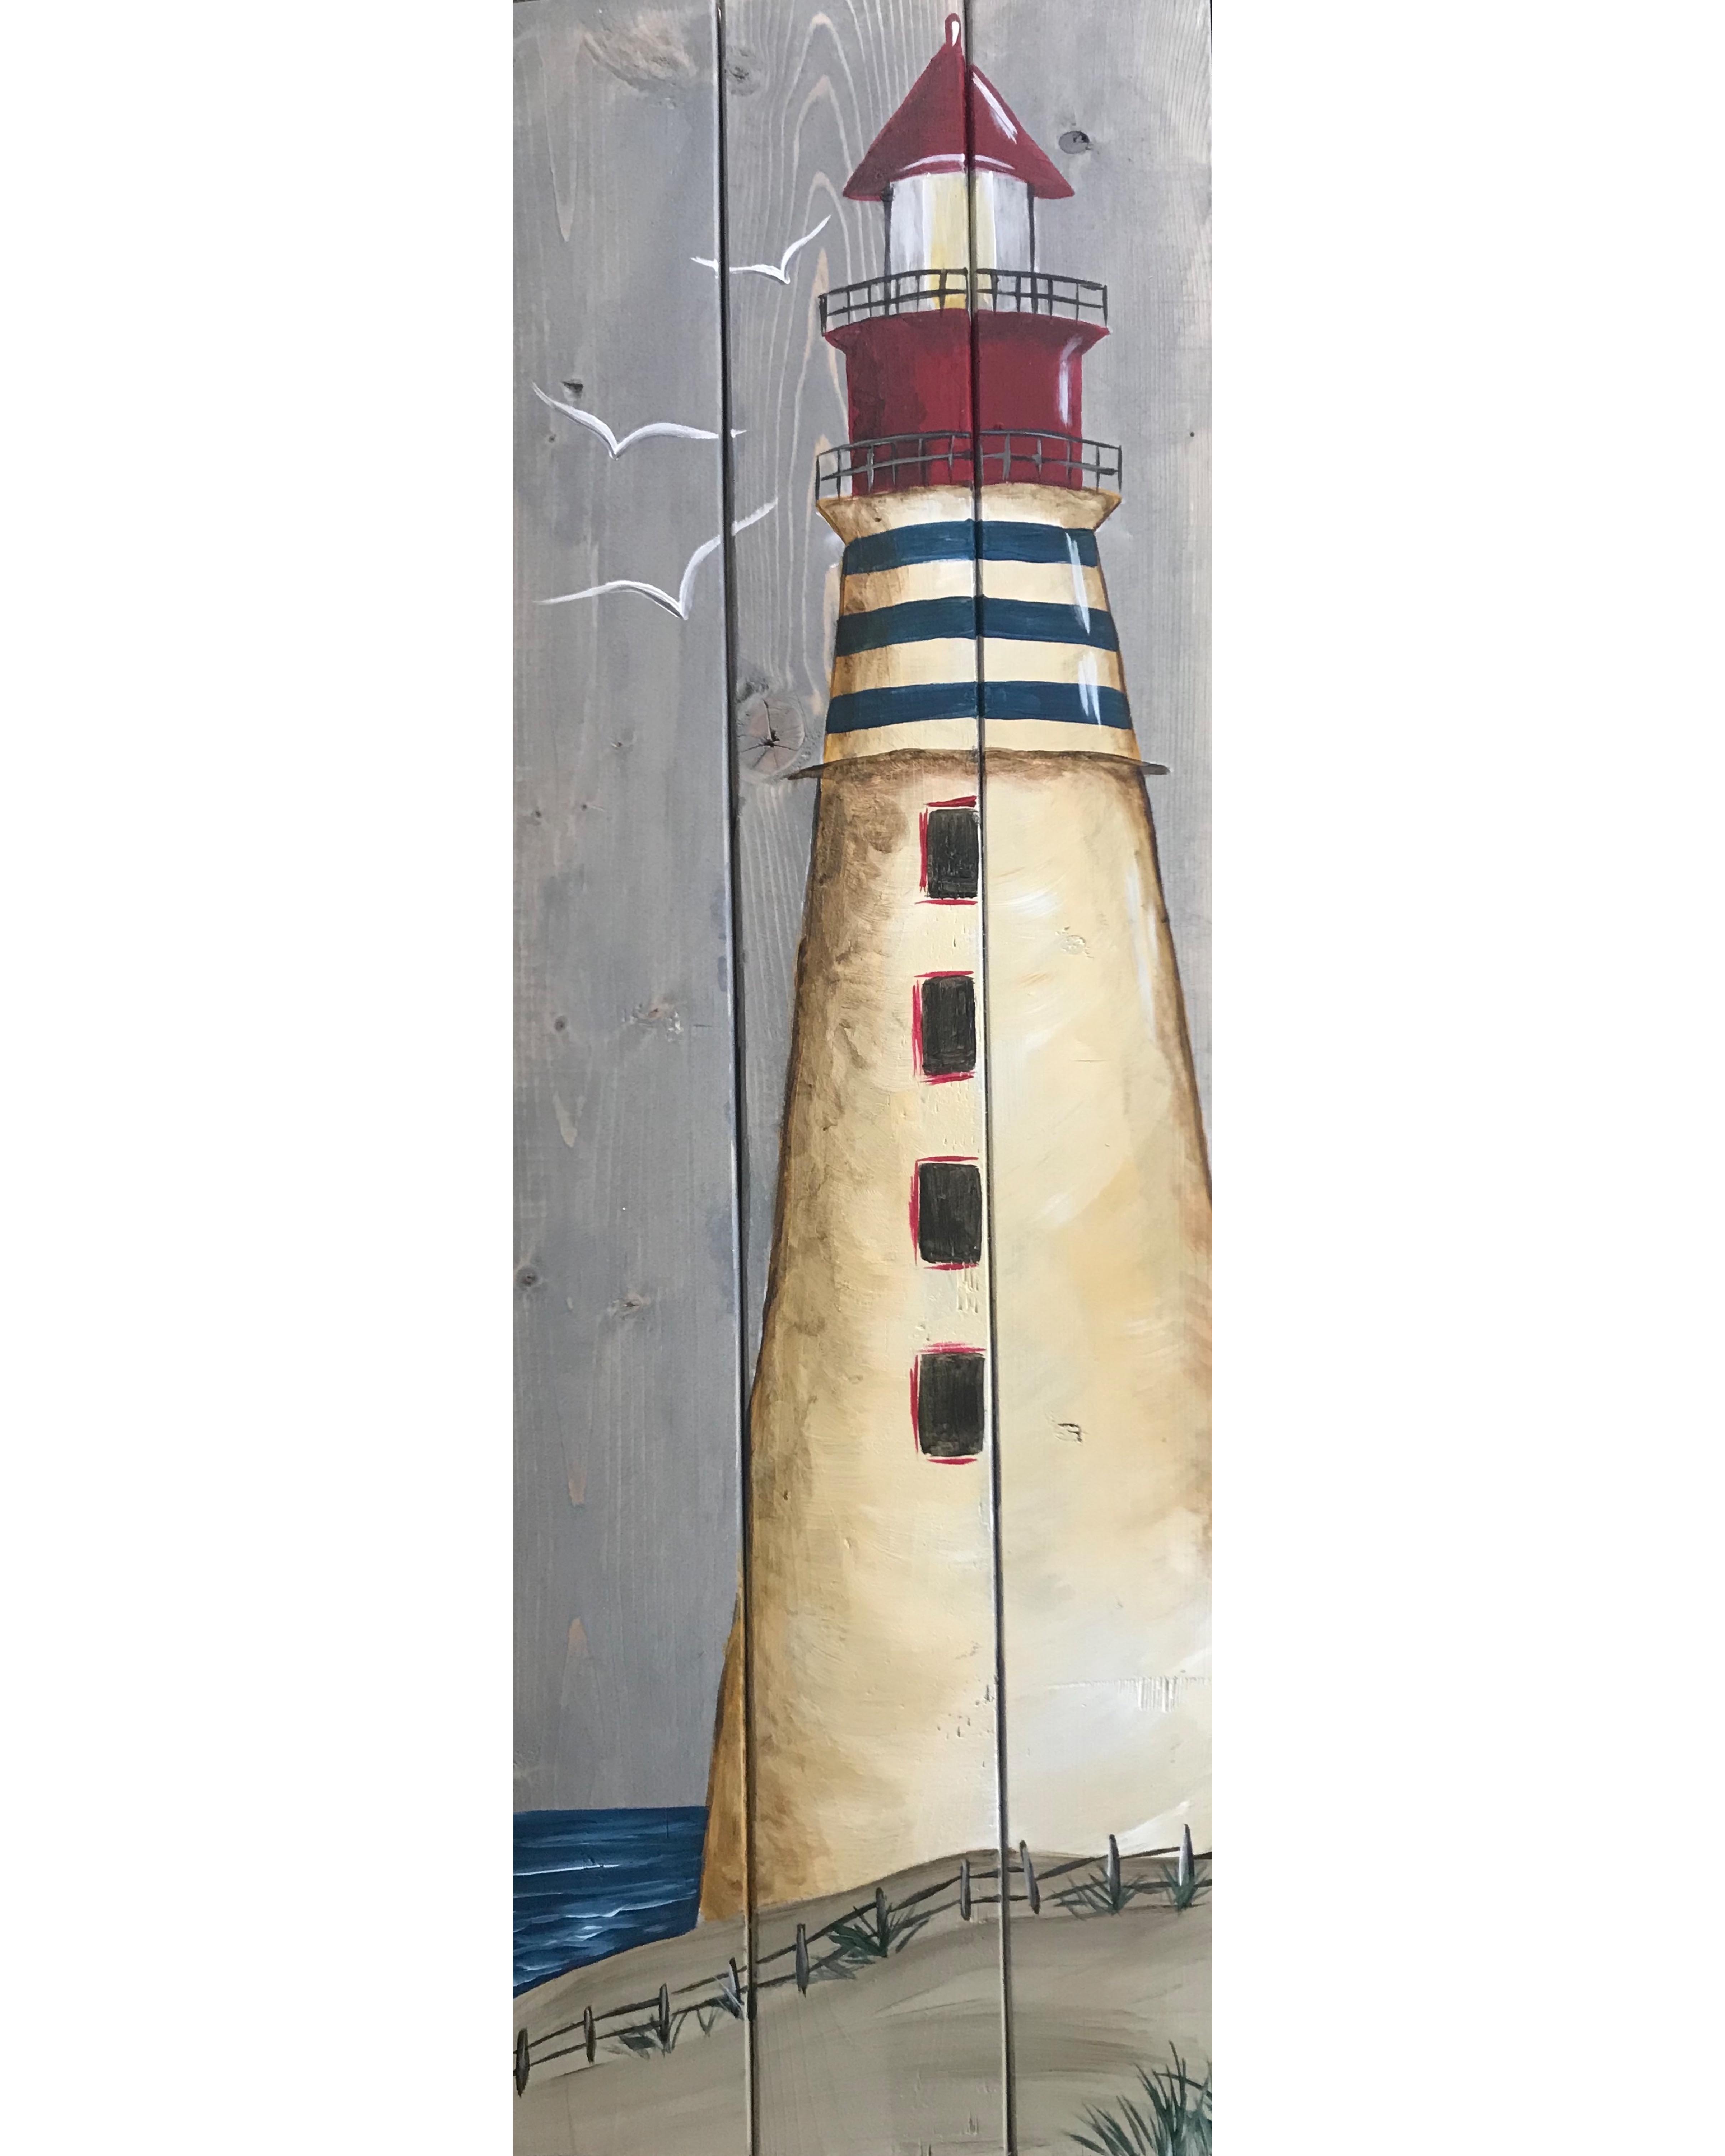 The Vintage Lighthouse